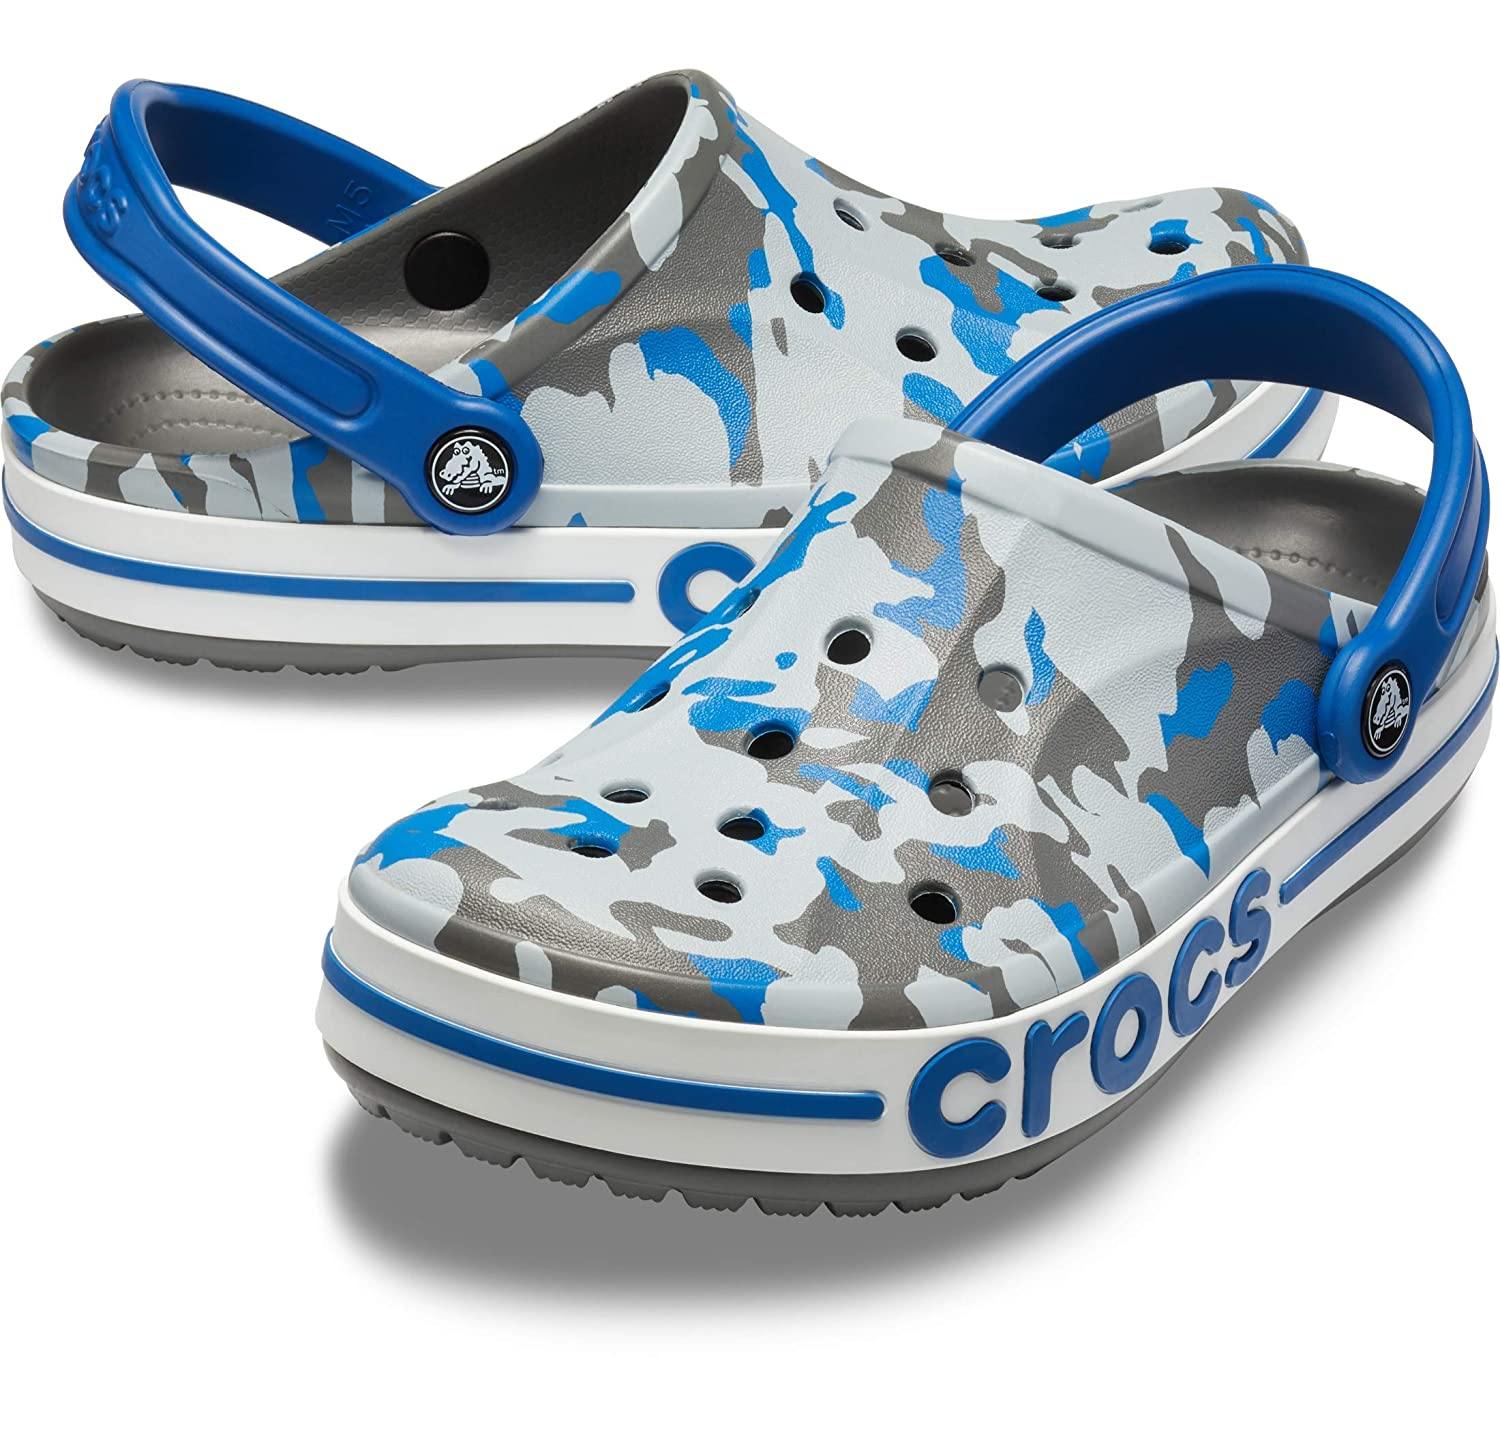 Authentic Crocs Bayaband Graphic Clog for Men and Women | mTravel Store